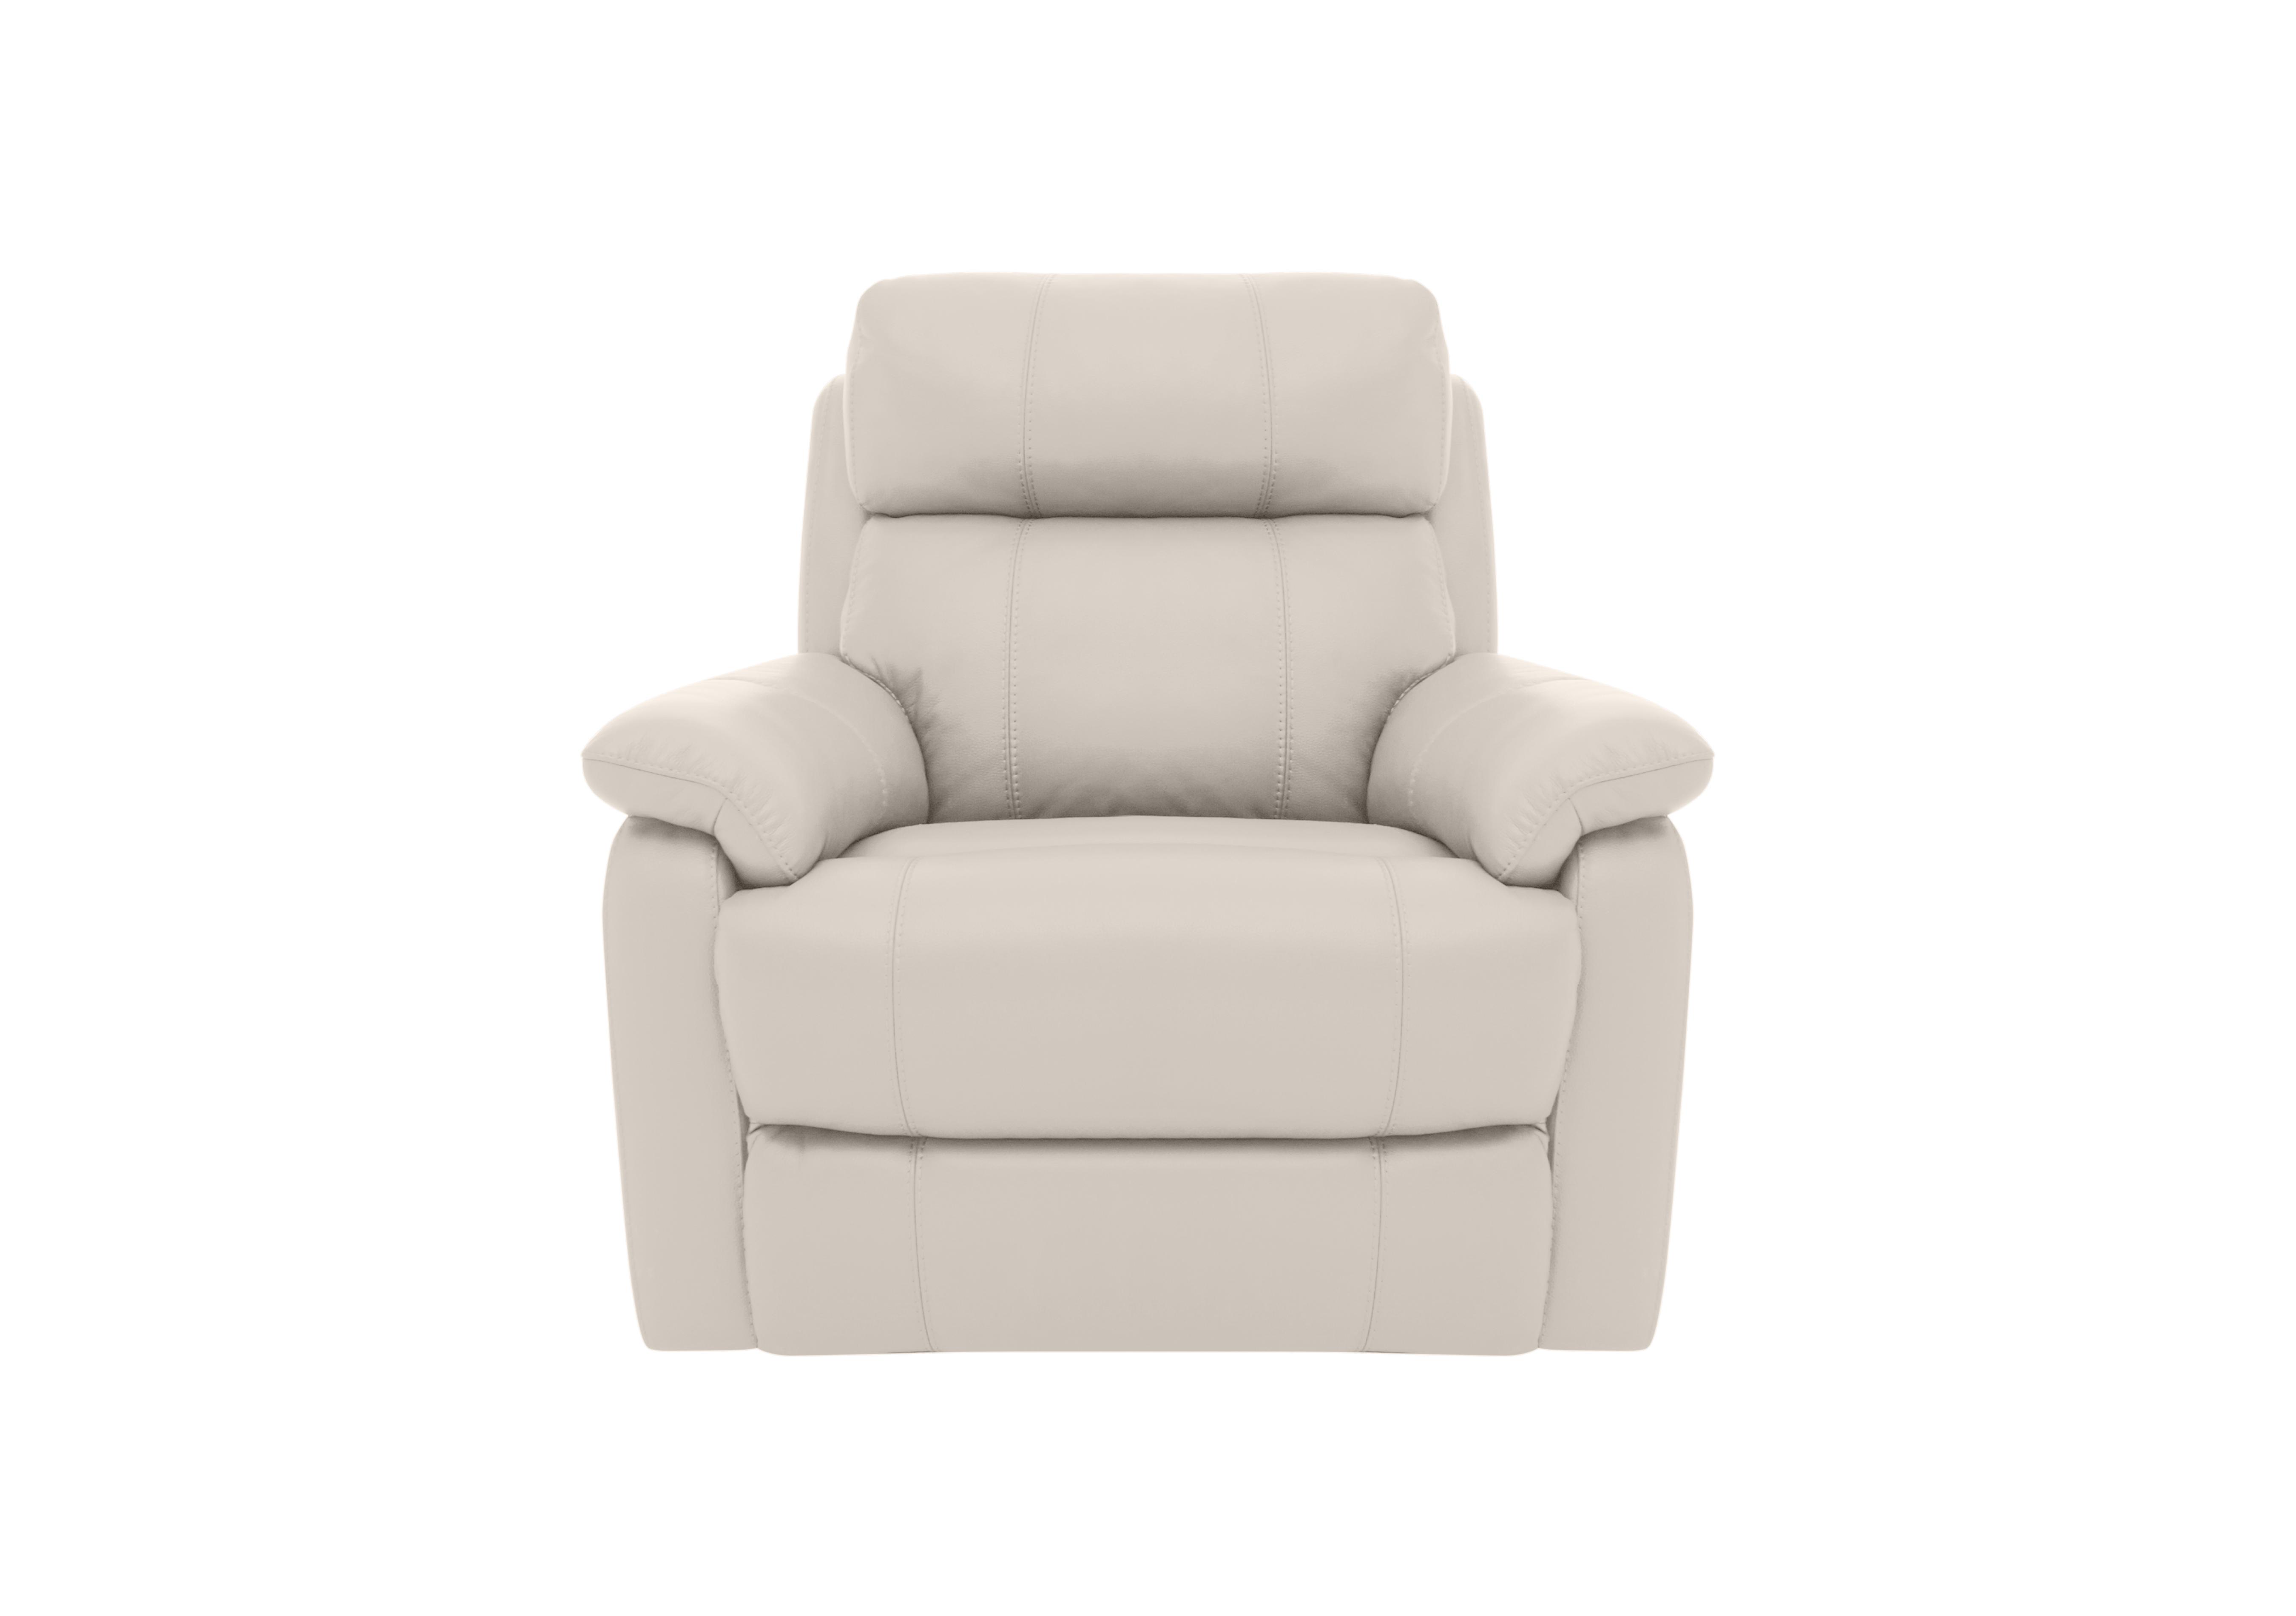 Relax Station Komodo Leather Power Armchair in Bv-156e Frost on Furniture Village